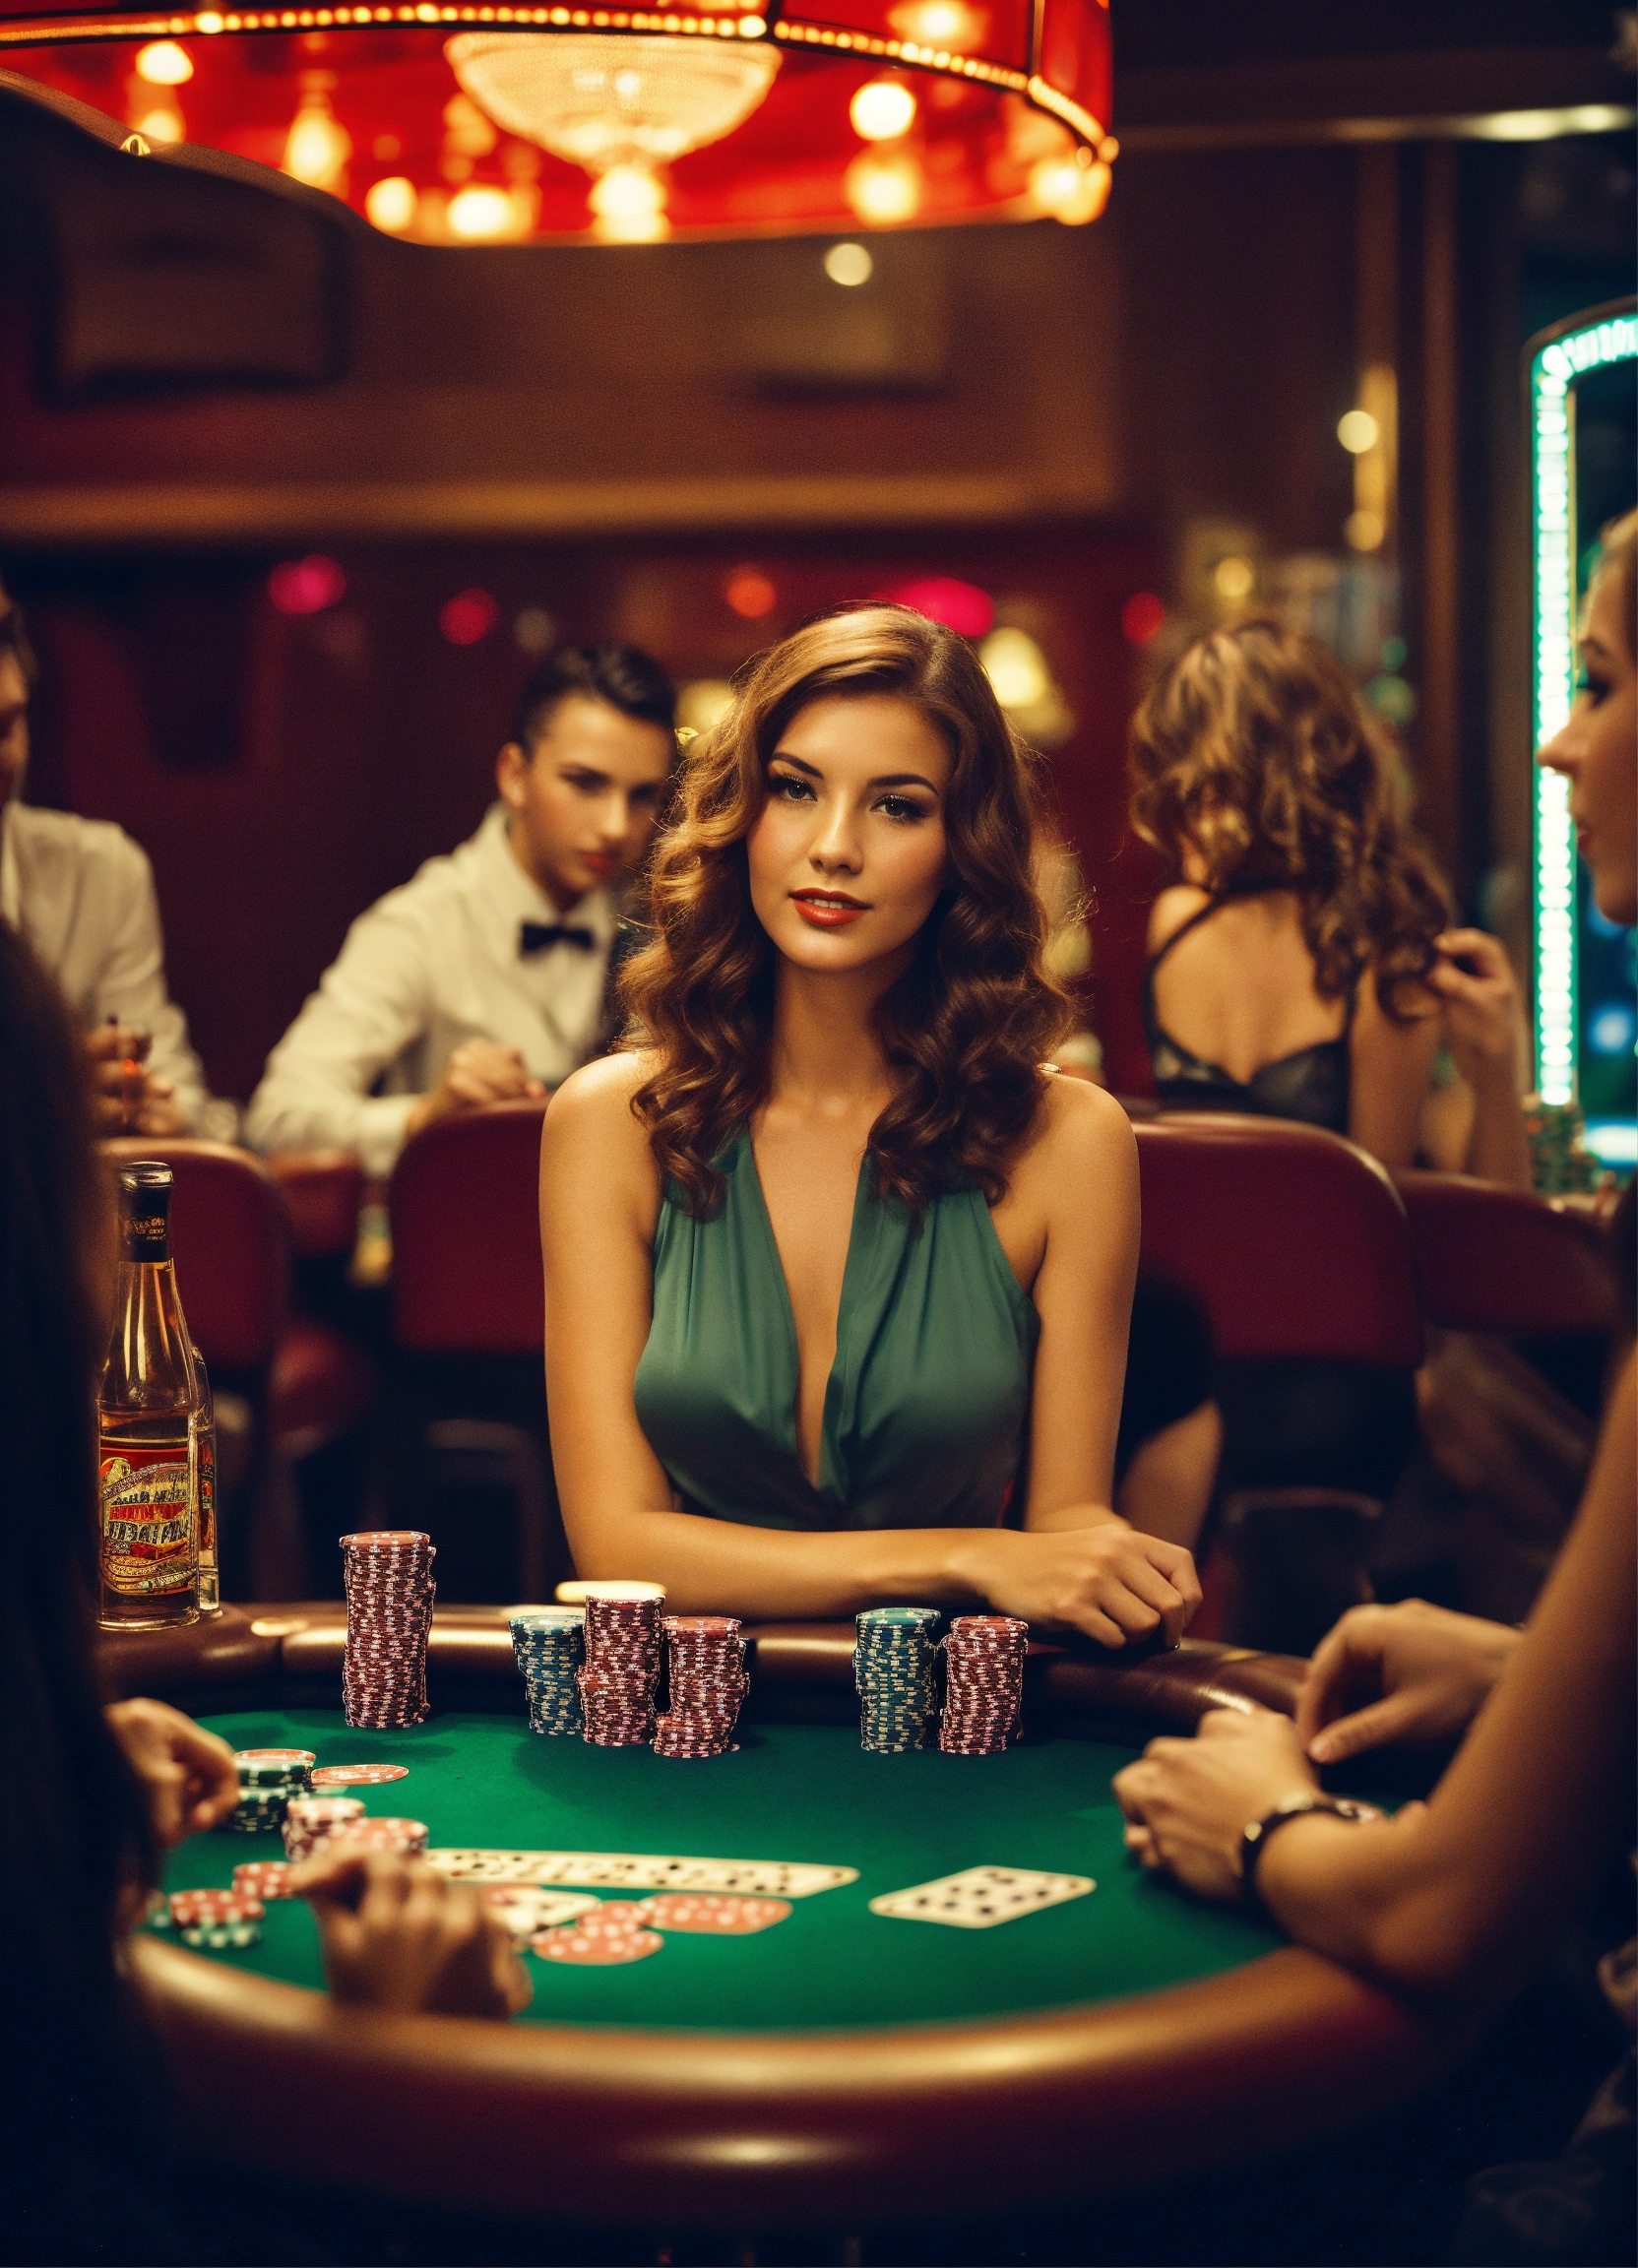 Poker is a lot like sex. Everyone thinks they are the best, but most don’t have a clue what they are doing. — Dutch Boyd